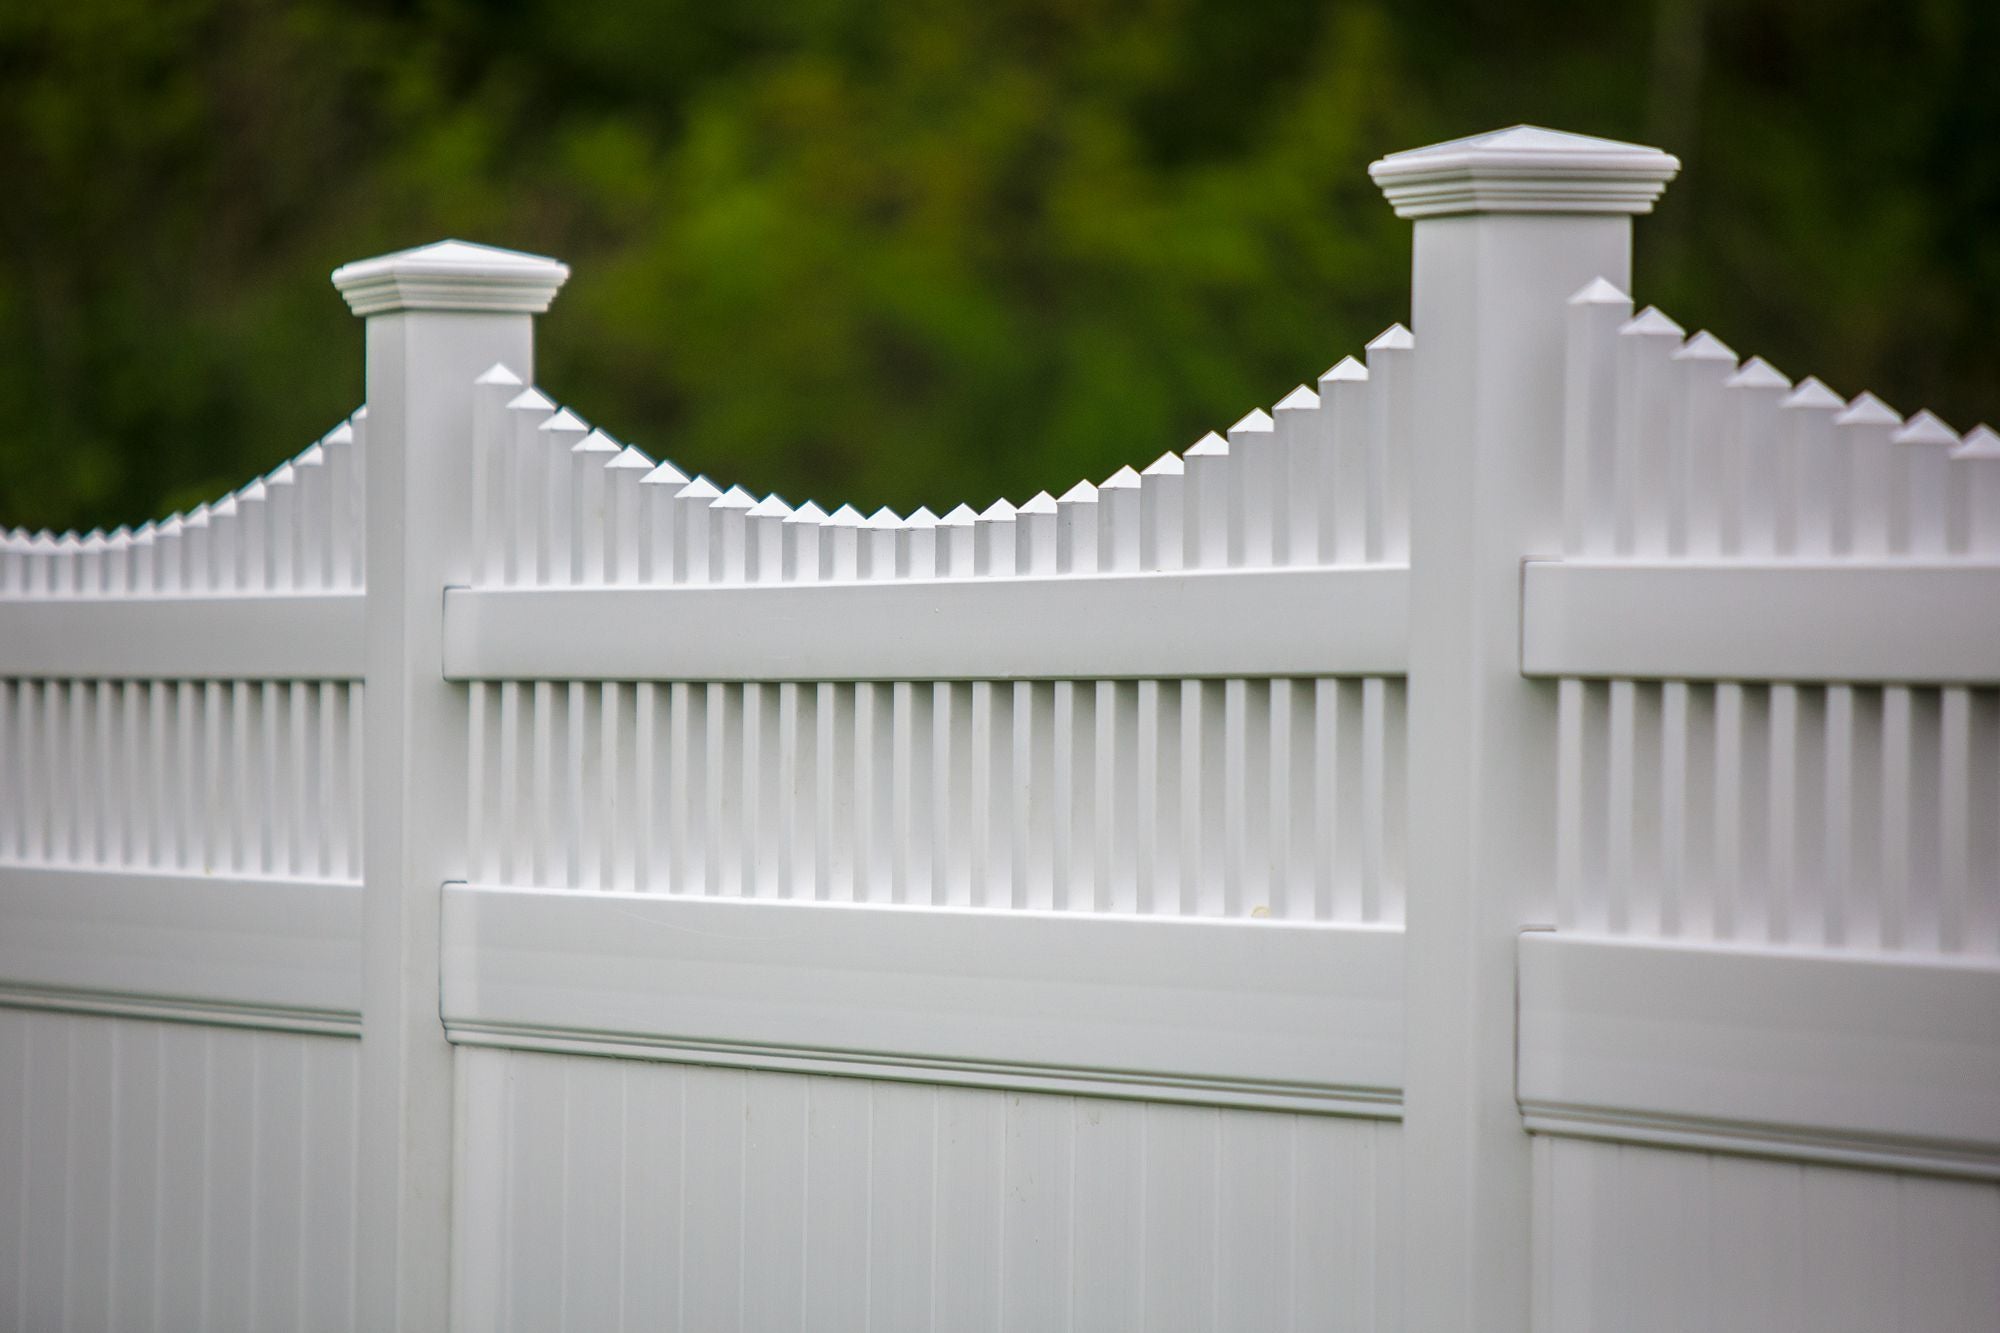 EAPC Tonish Vinyl Privacy Fence with Scalloped Picket Top